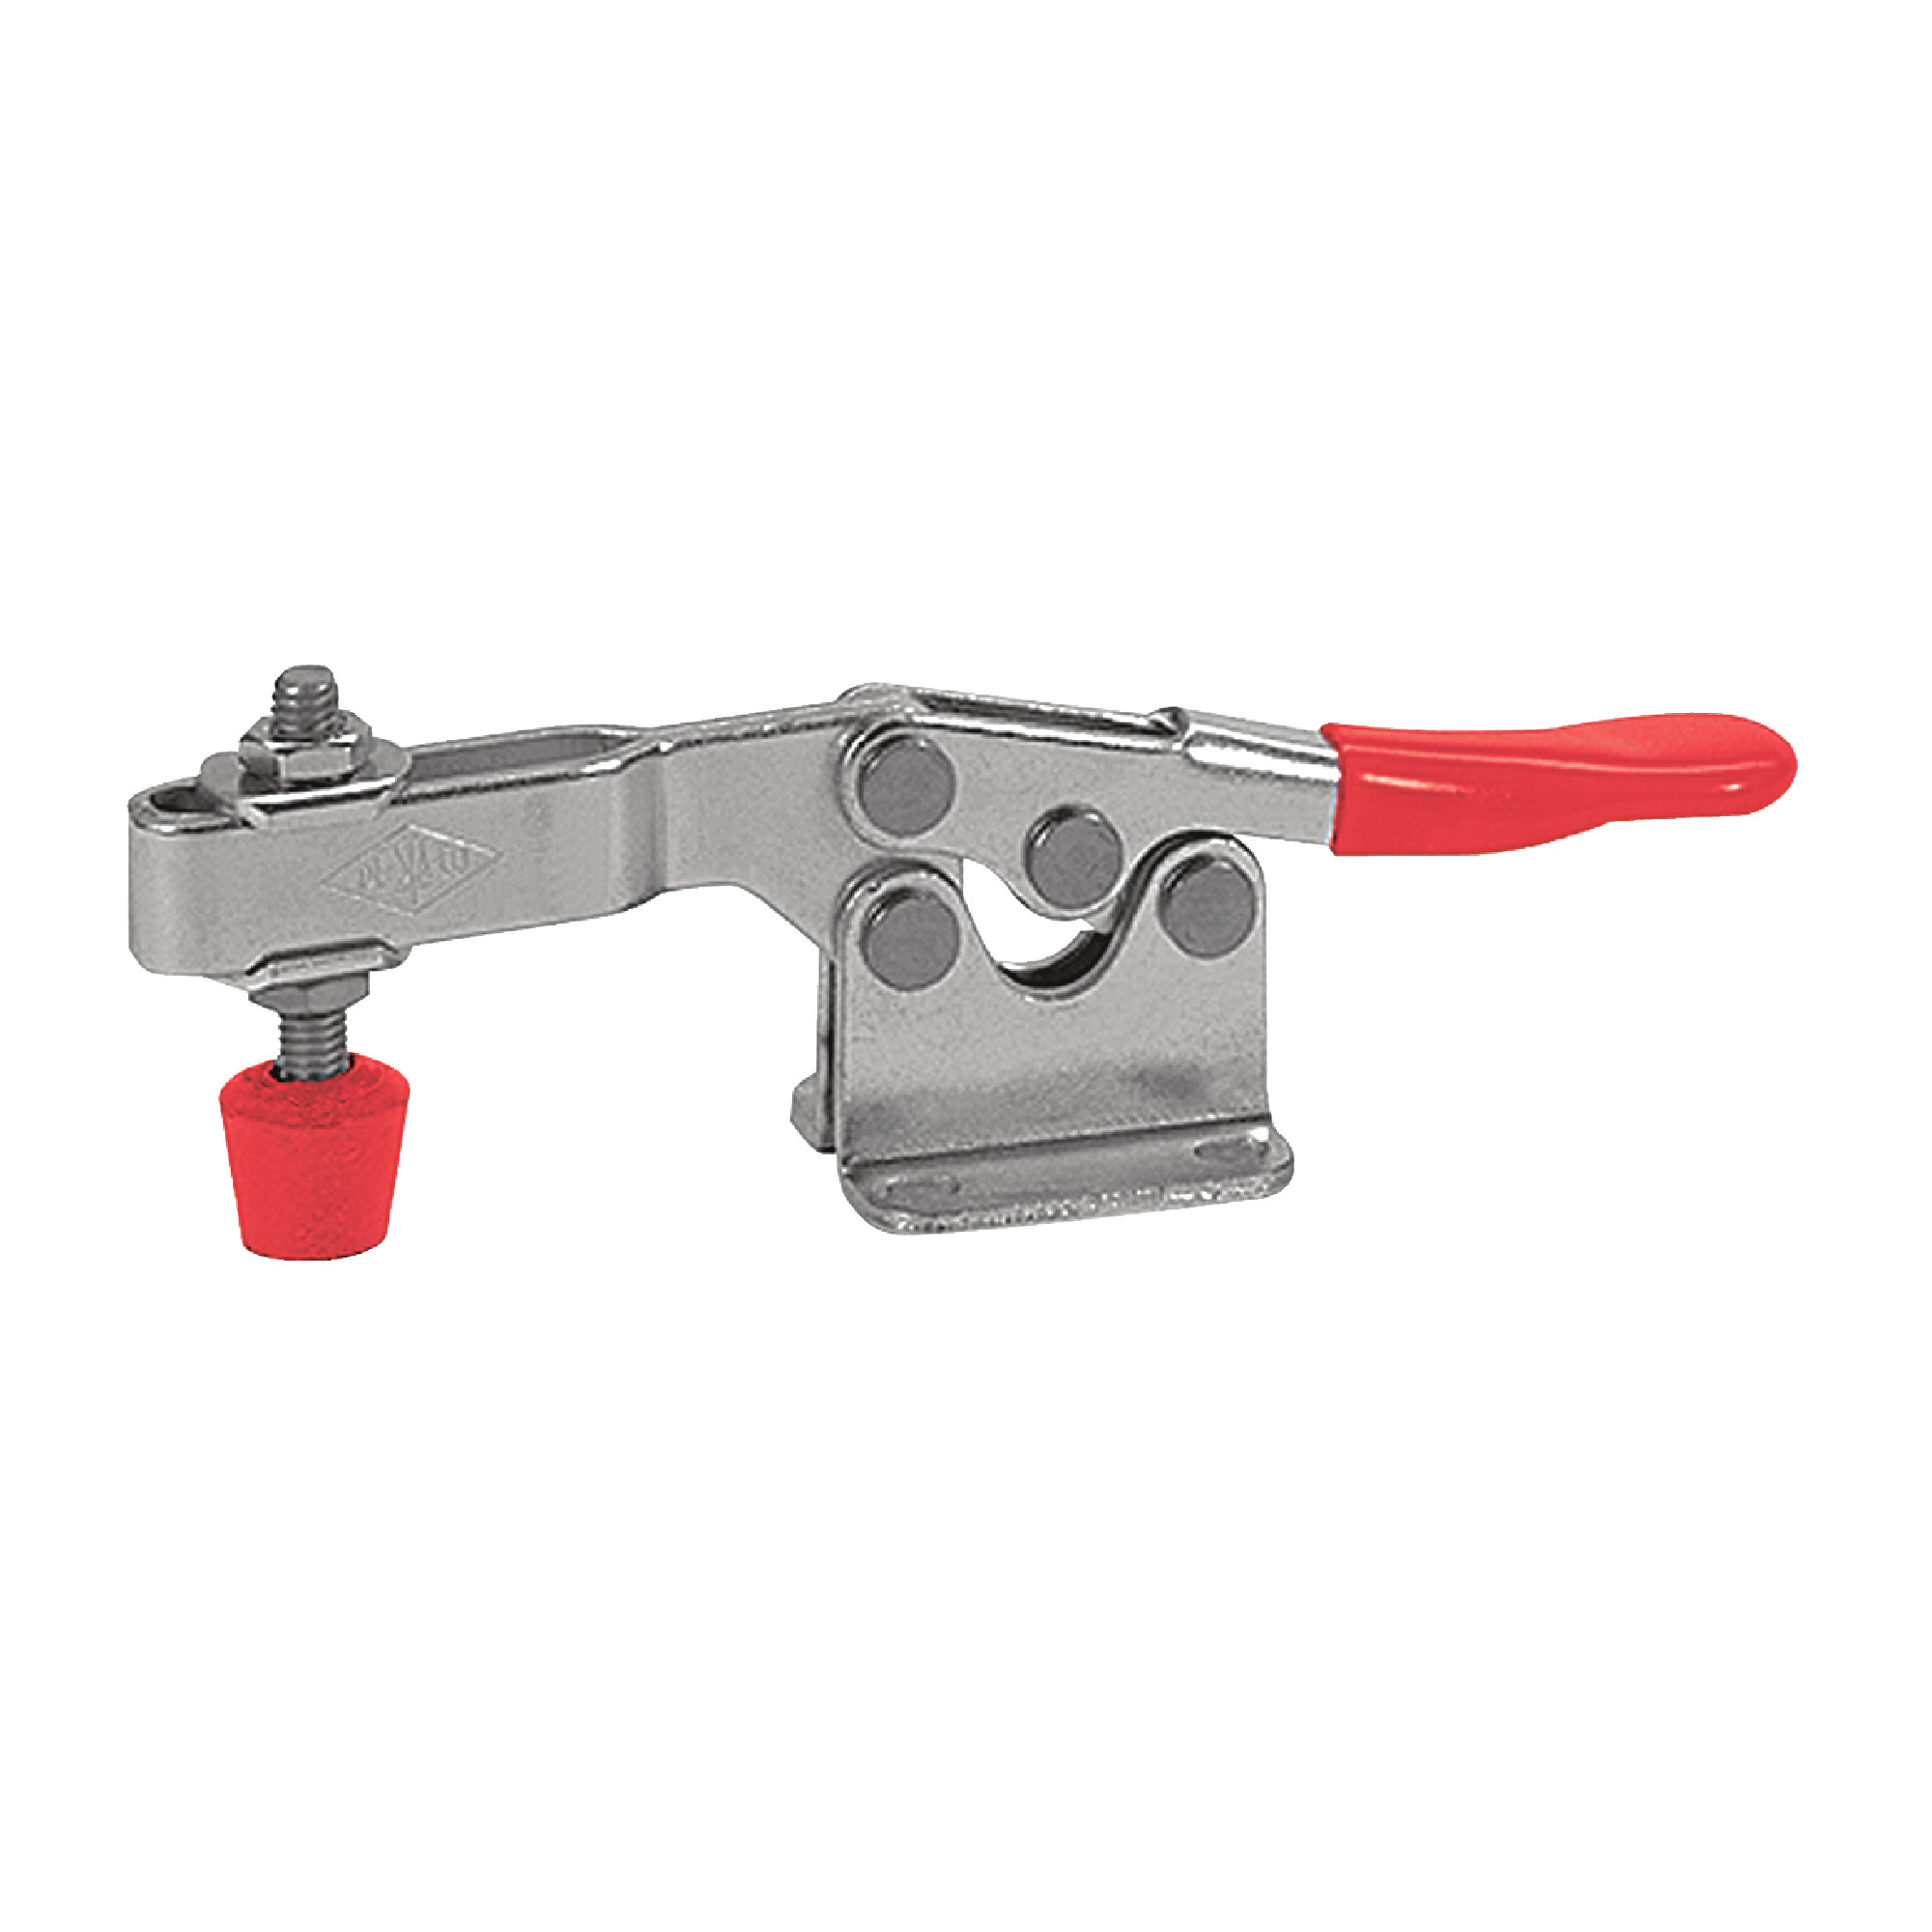 Horizontal Hold Down Action Toggle Clamp